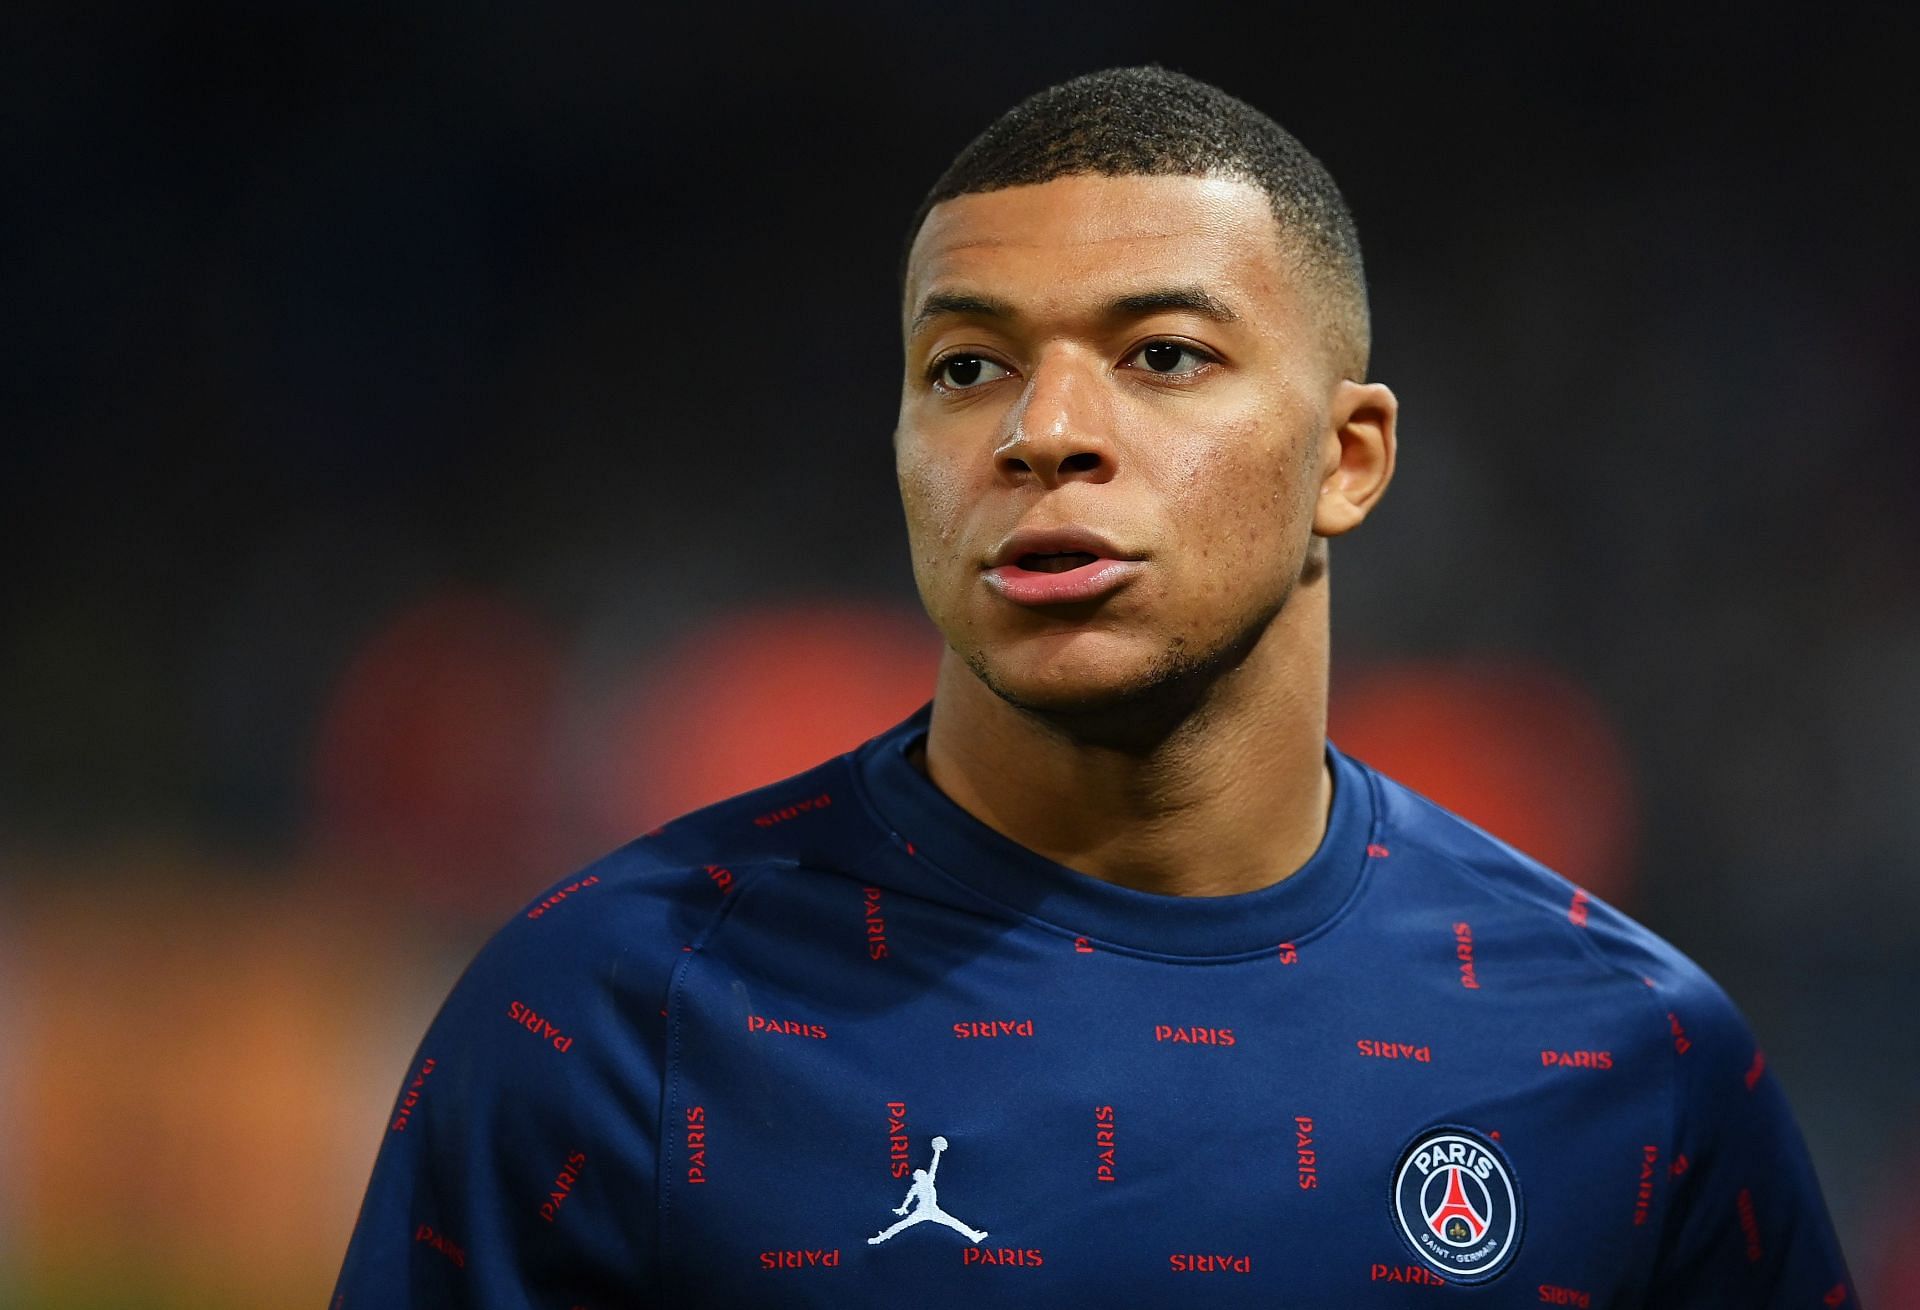 Kylian Mbappe has decided to leave PSG and move to Real Madrid next year.